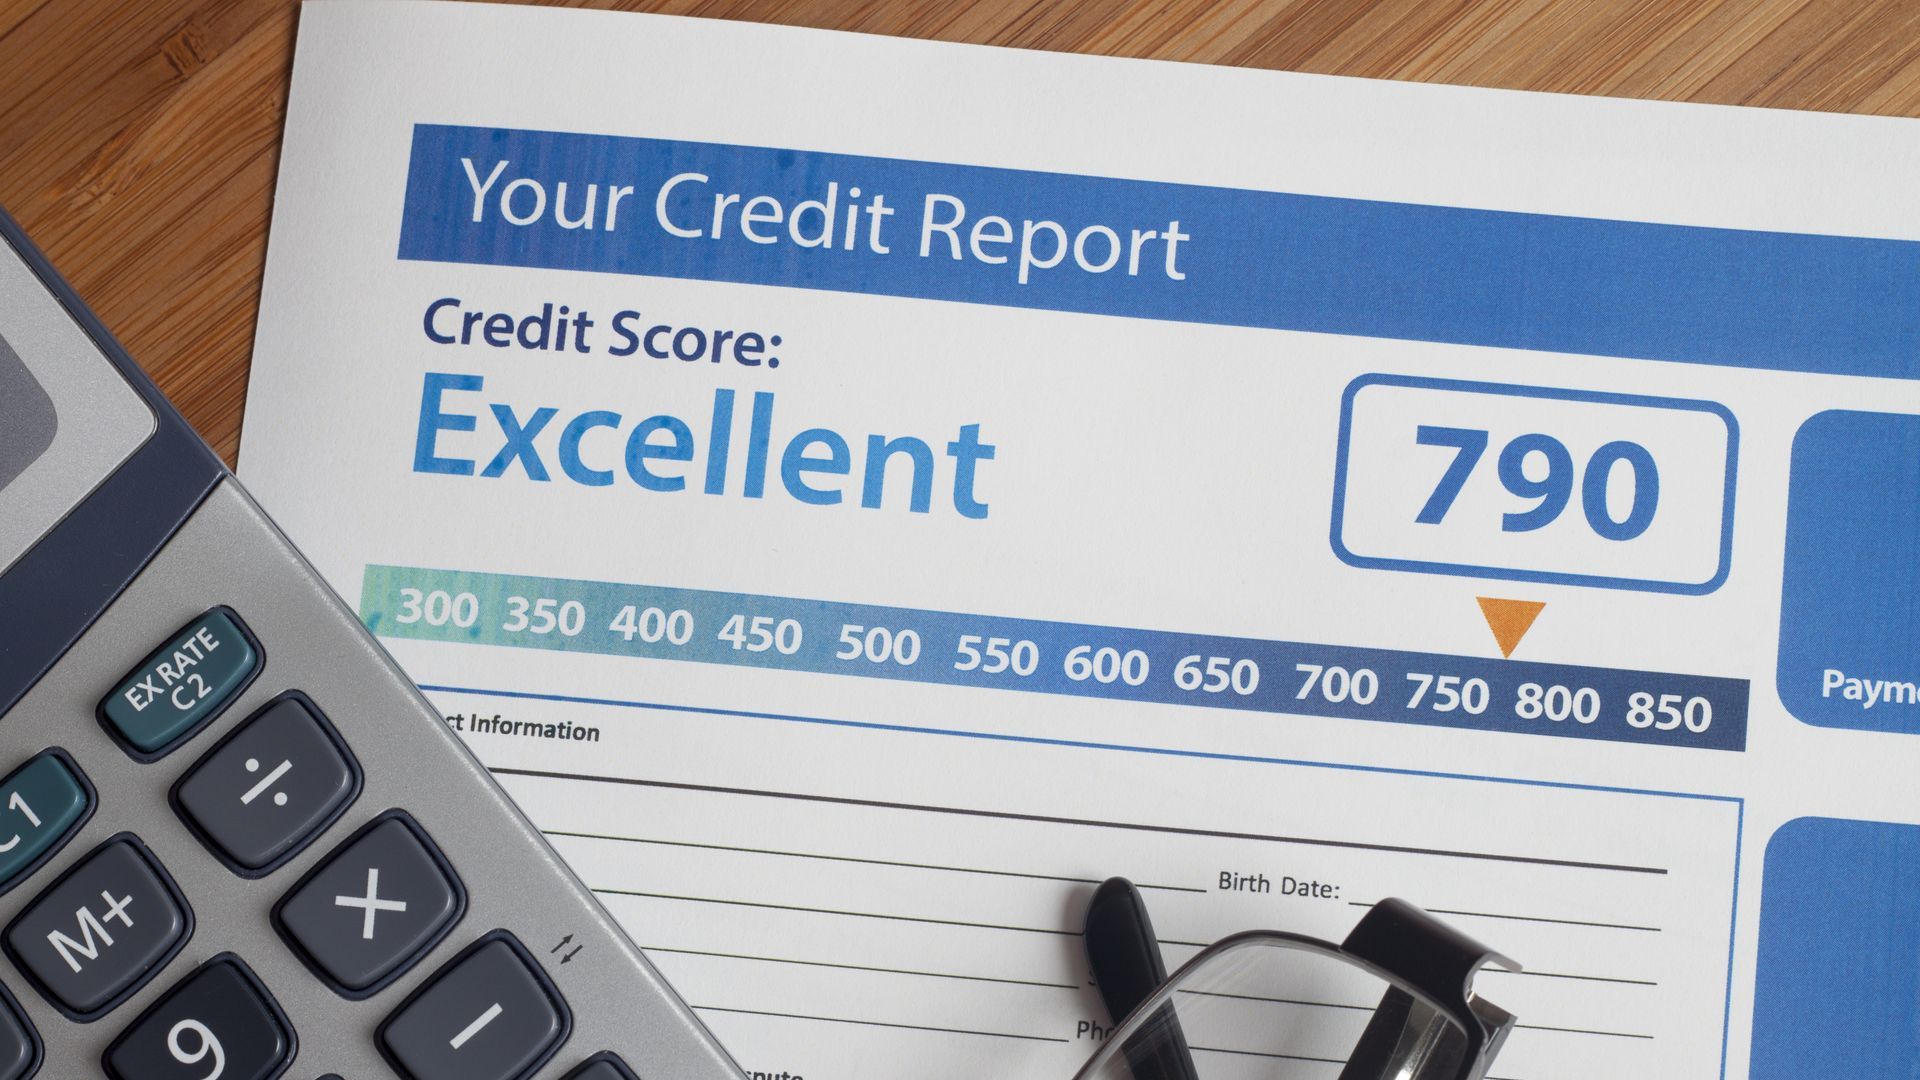 a document with high credit score printed on it